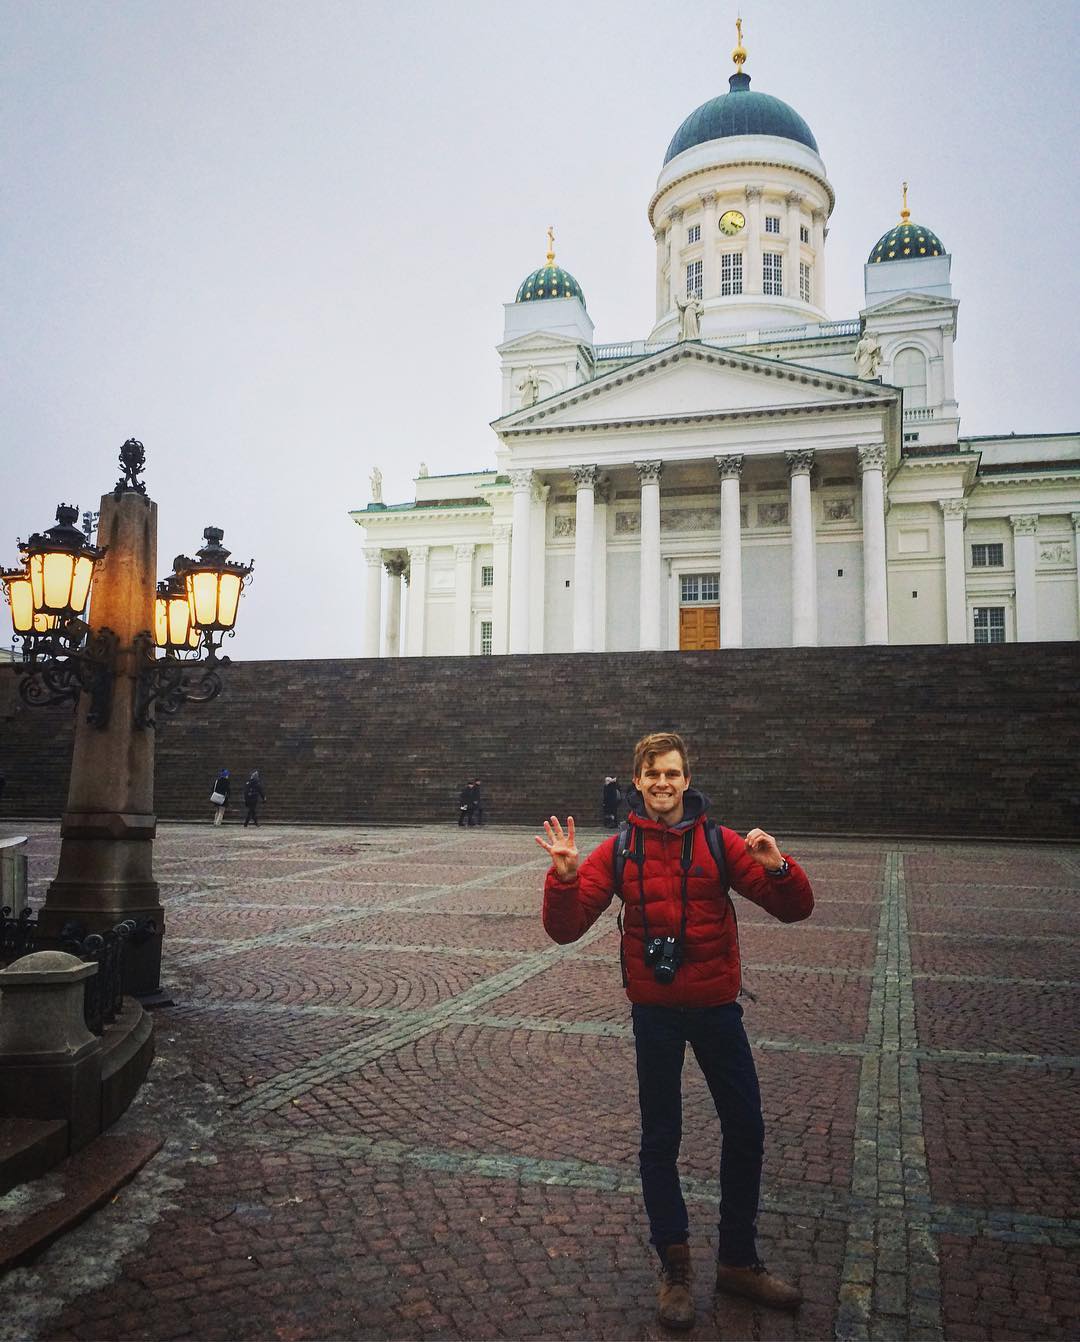 Man with red jacket in Helsinki Finland